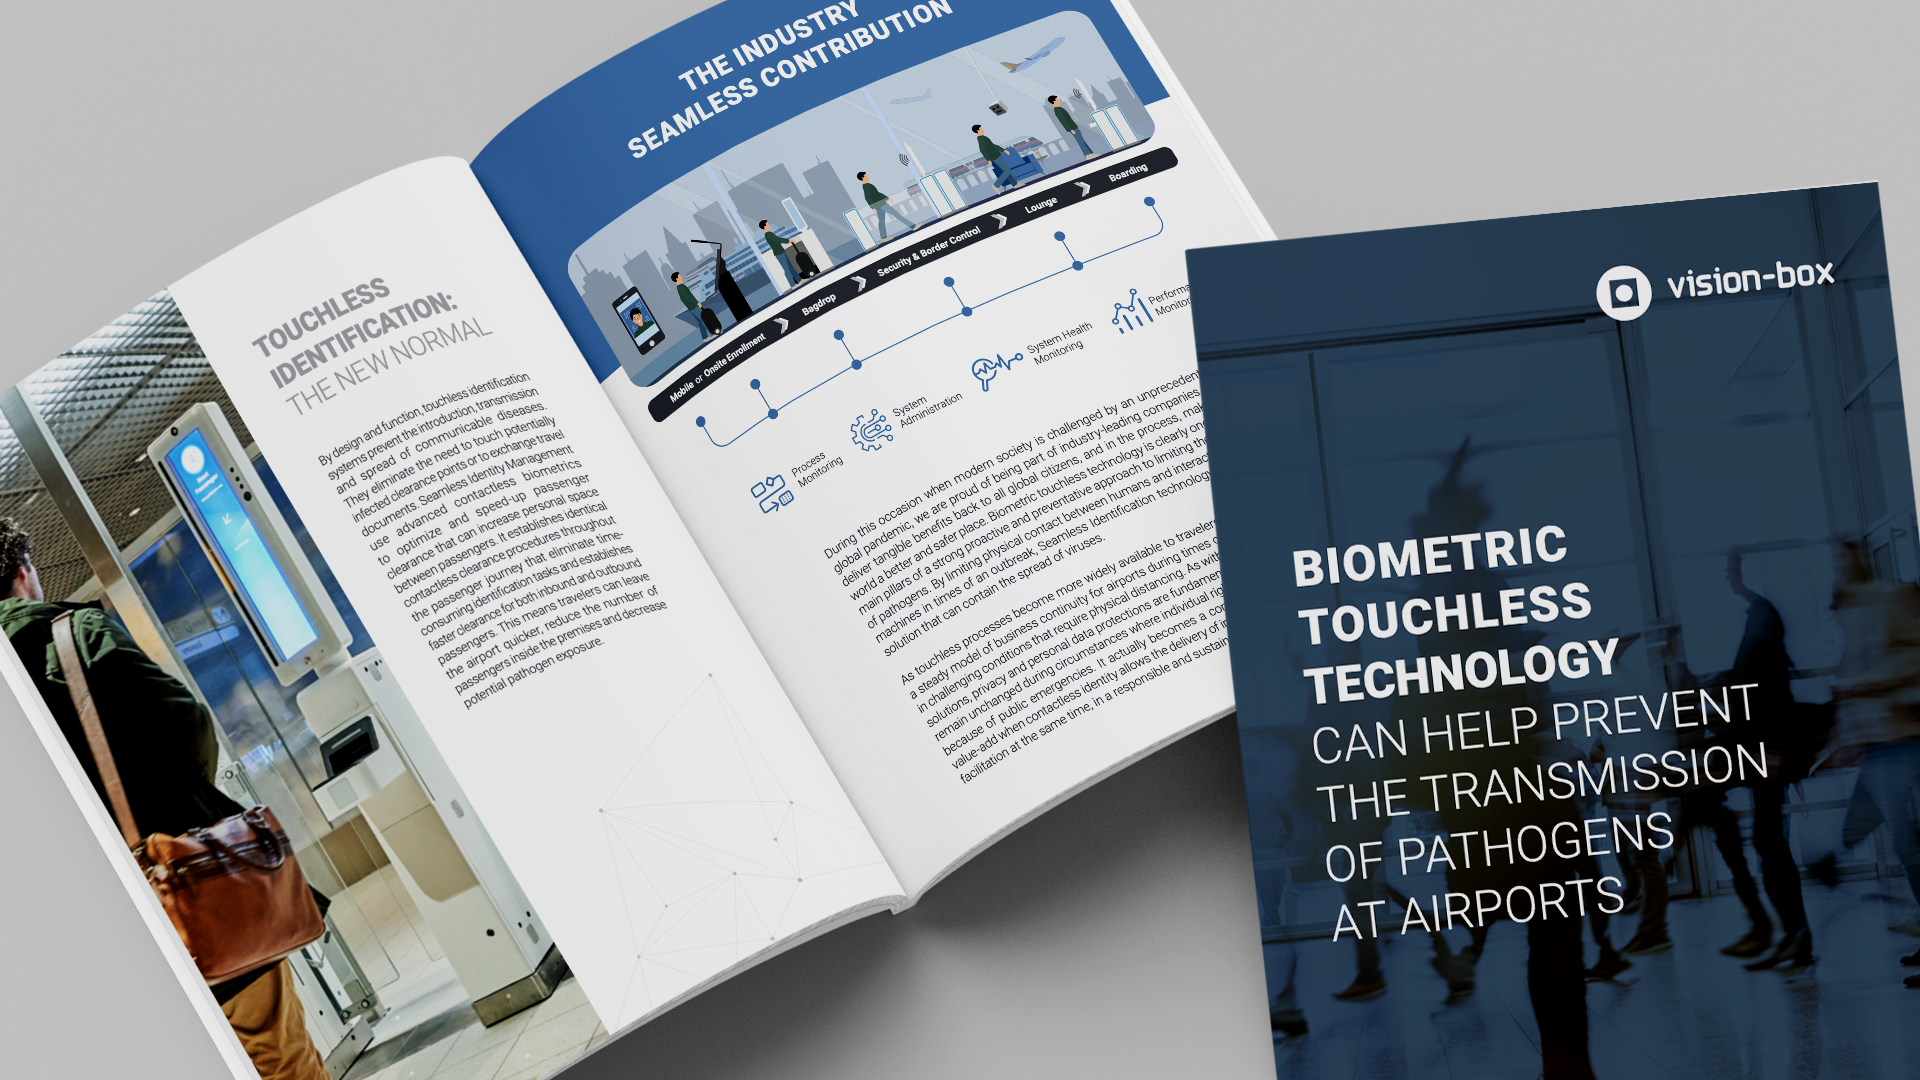 White Paper Biometric Touchless Technology Can Help Prevent the Transmission of Pathogens at Airports